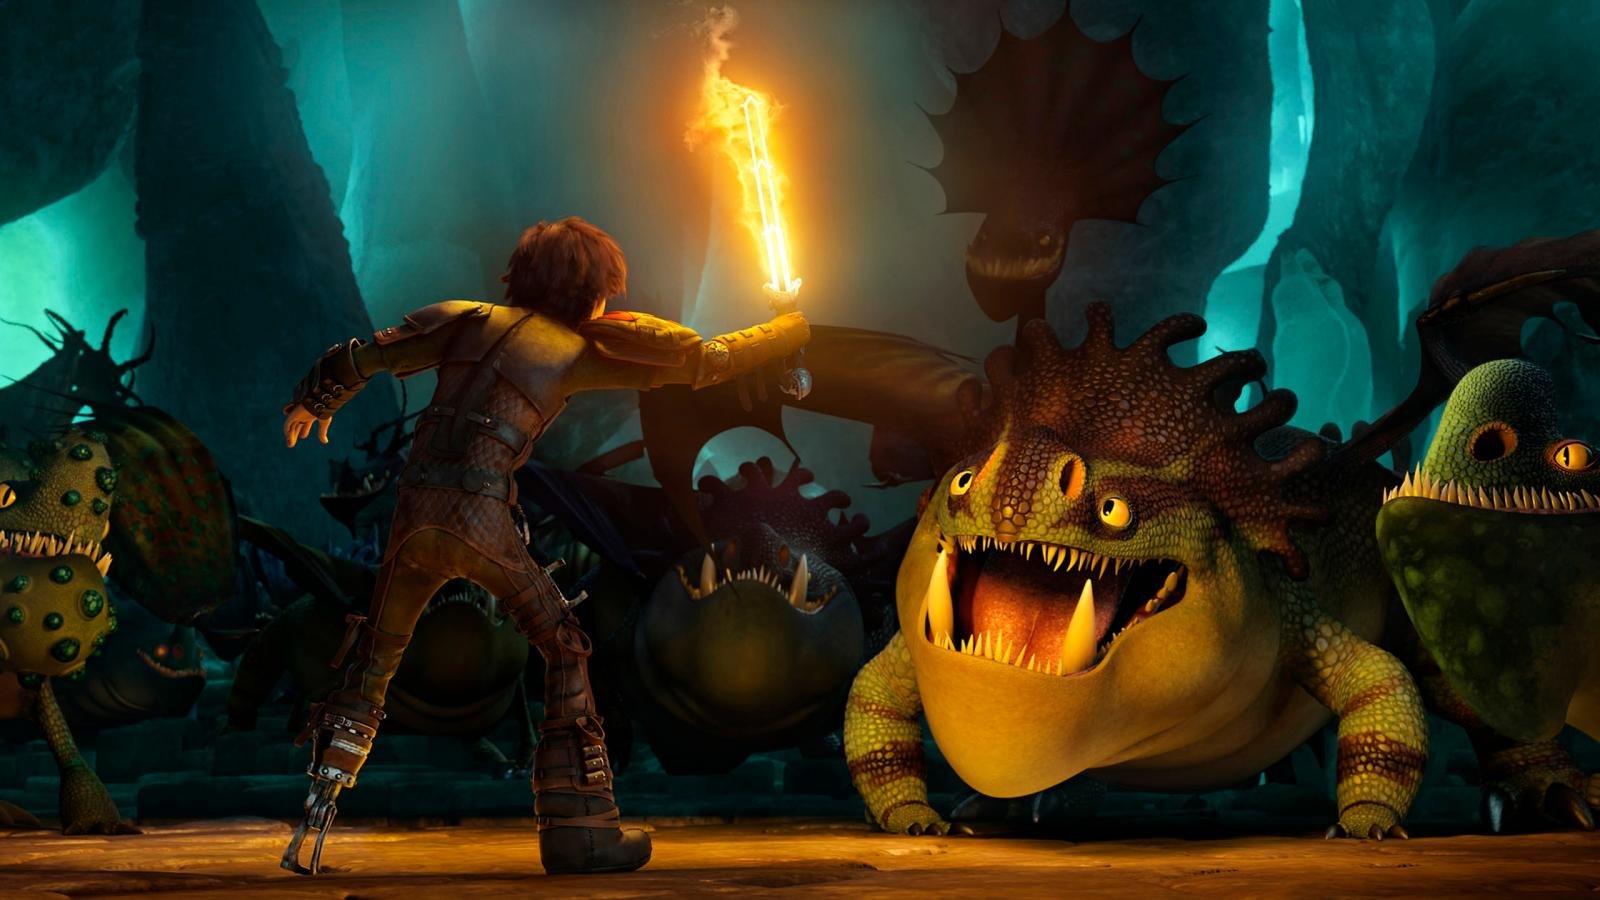 How To Train Your Dragon 2 Wallpapers 1600x900 Desktop Backgrounds